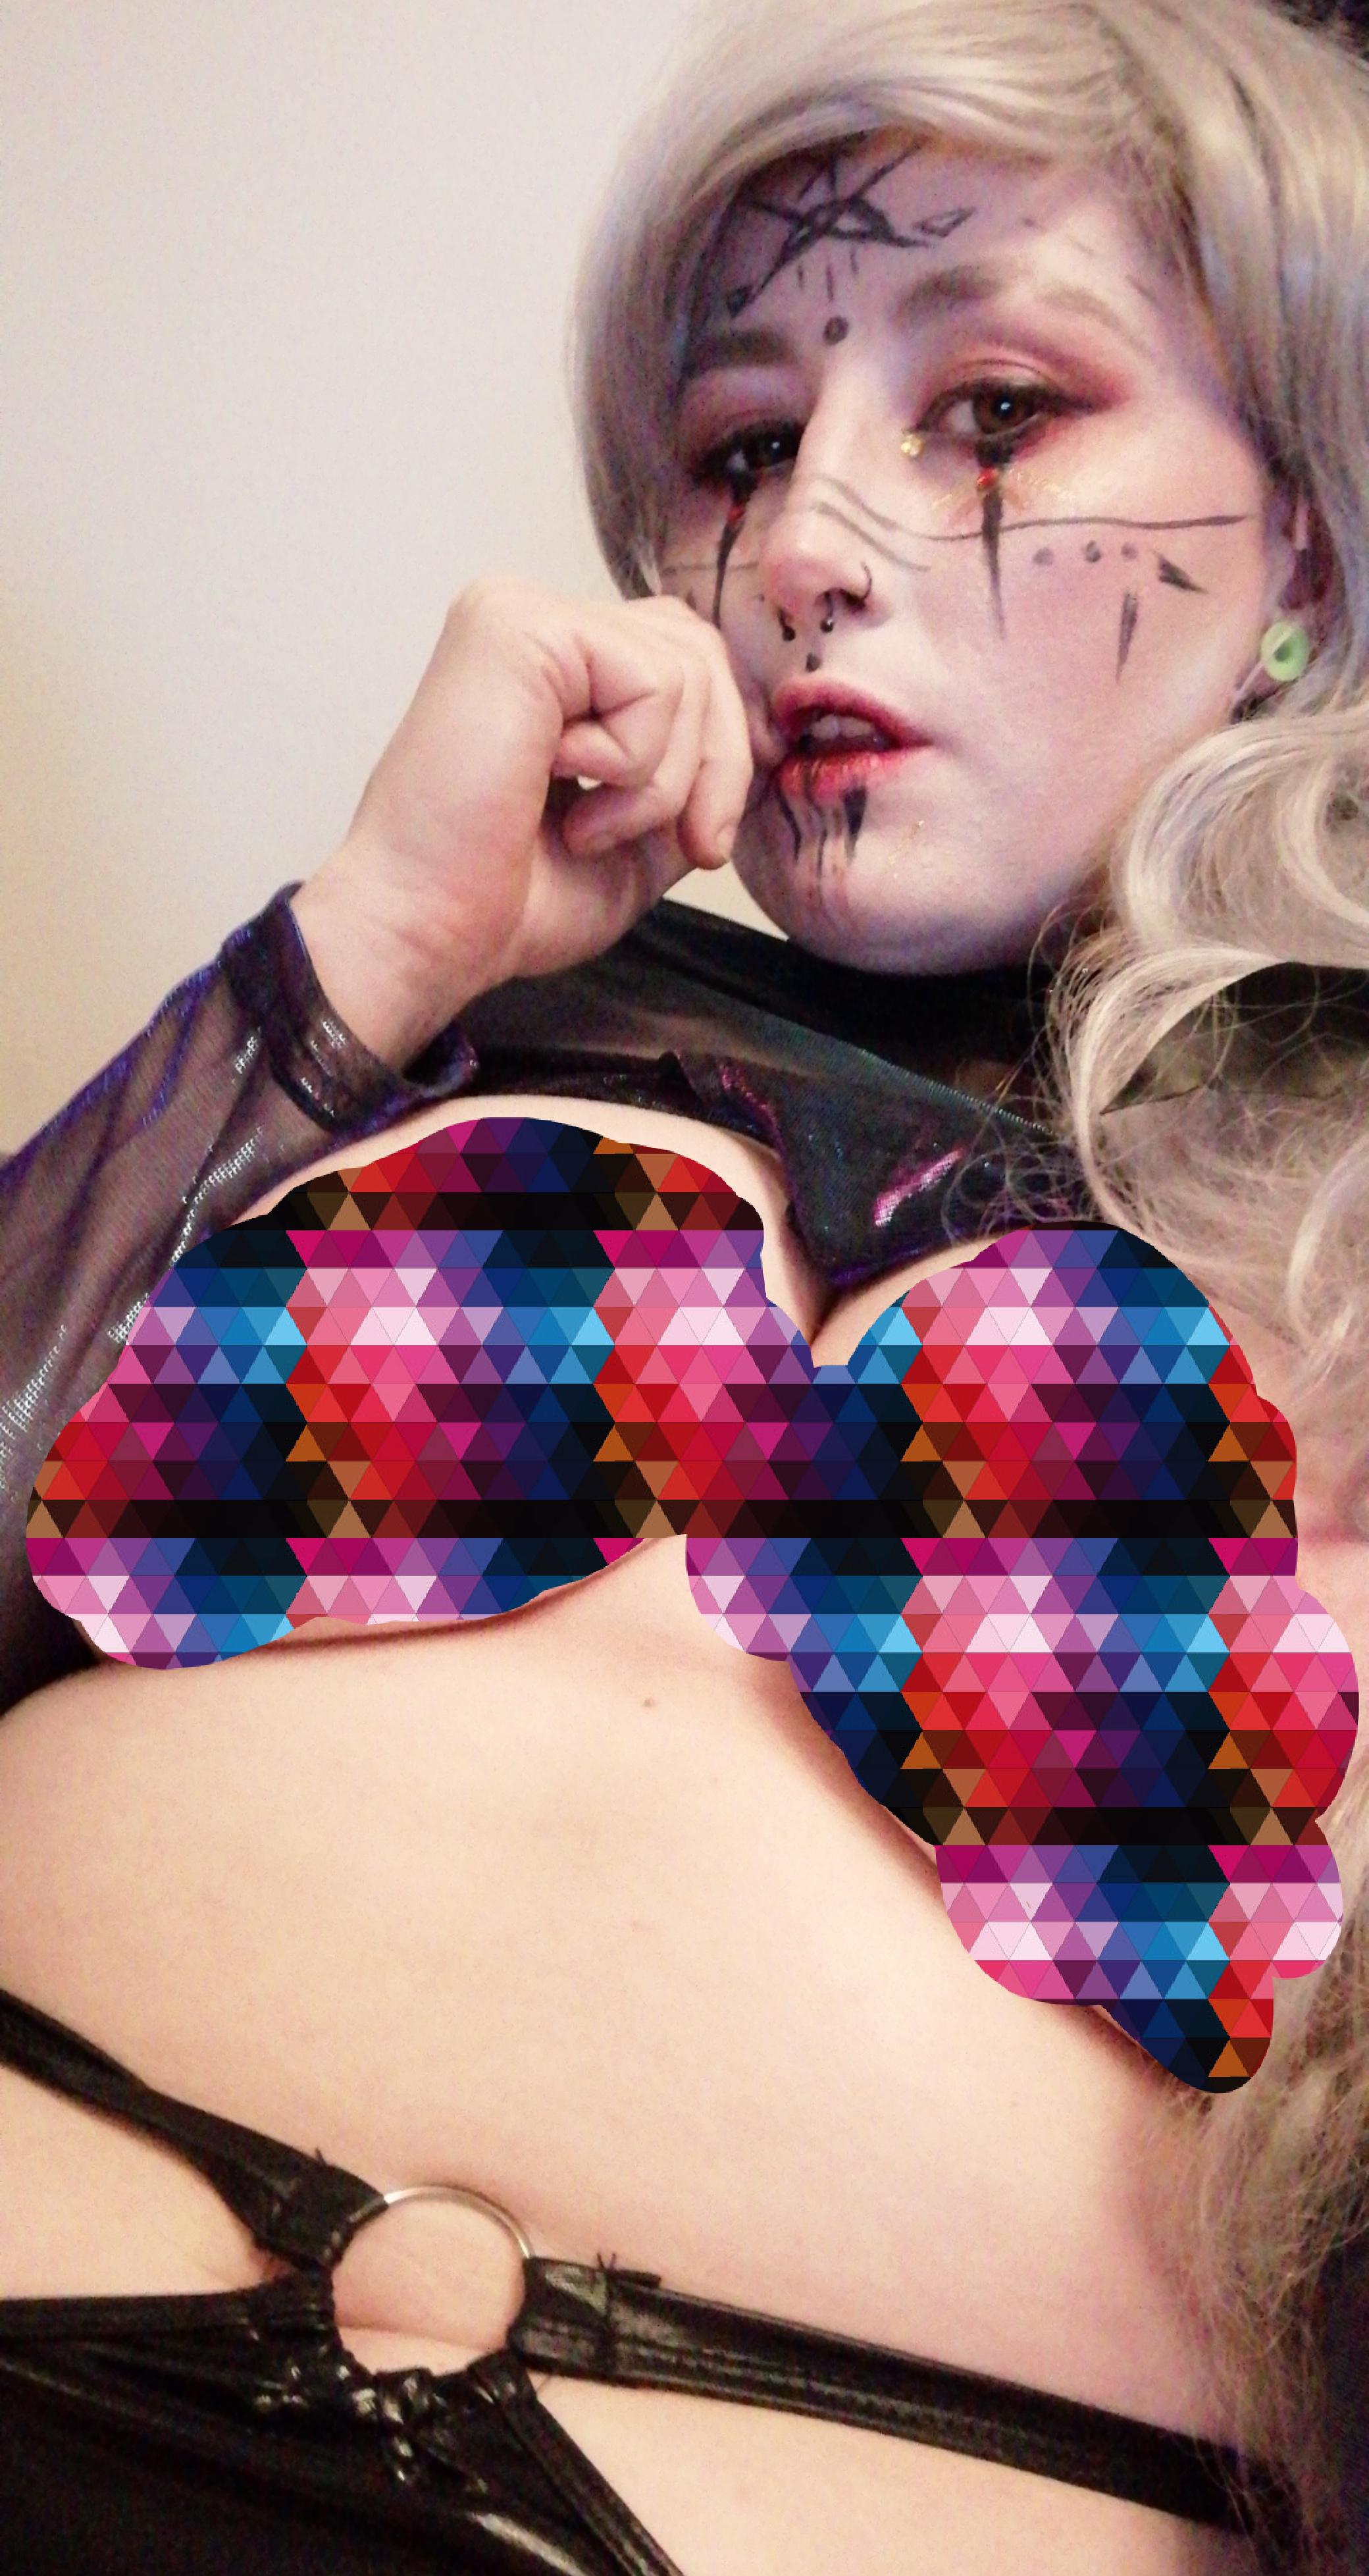 Wanna See The Full Picture Of The Naughty Goth Elf ? OF: A_little_nex